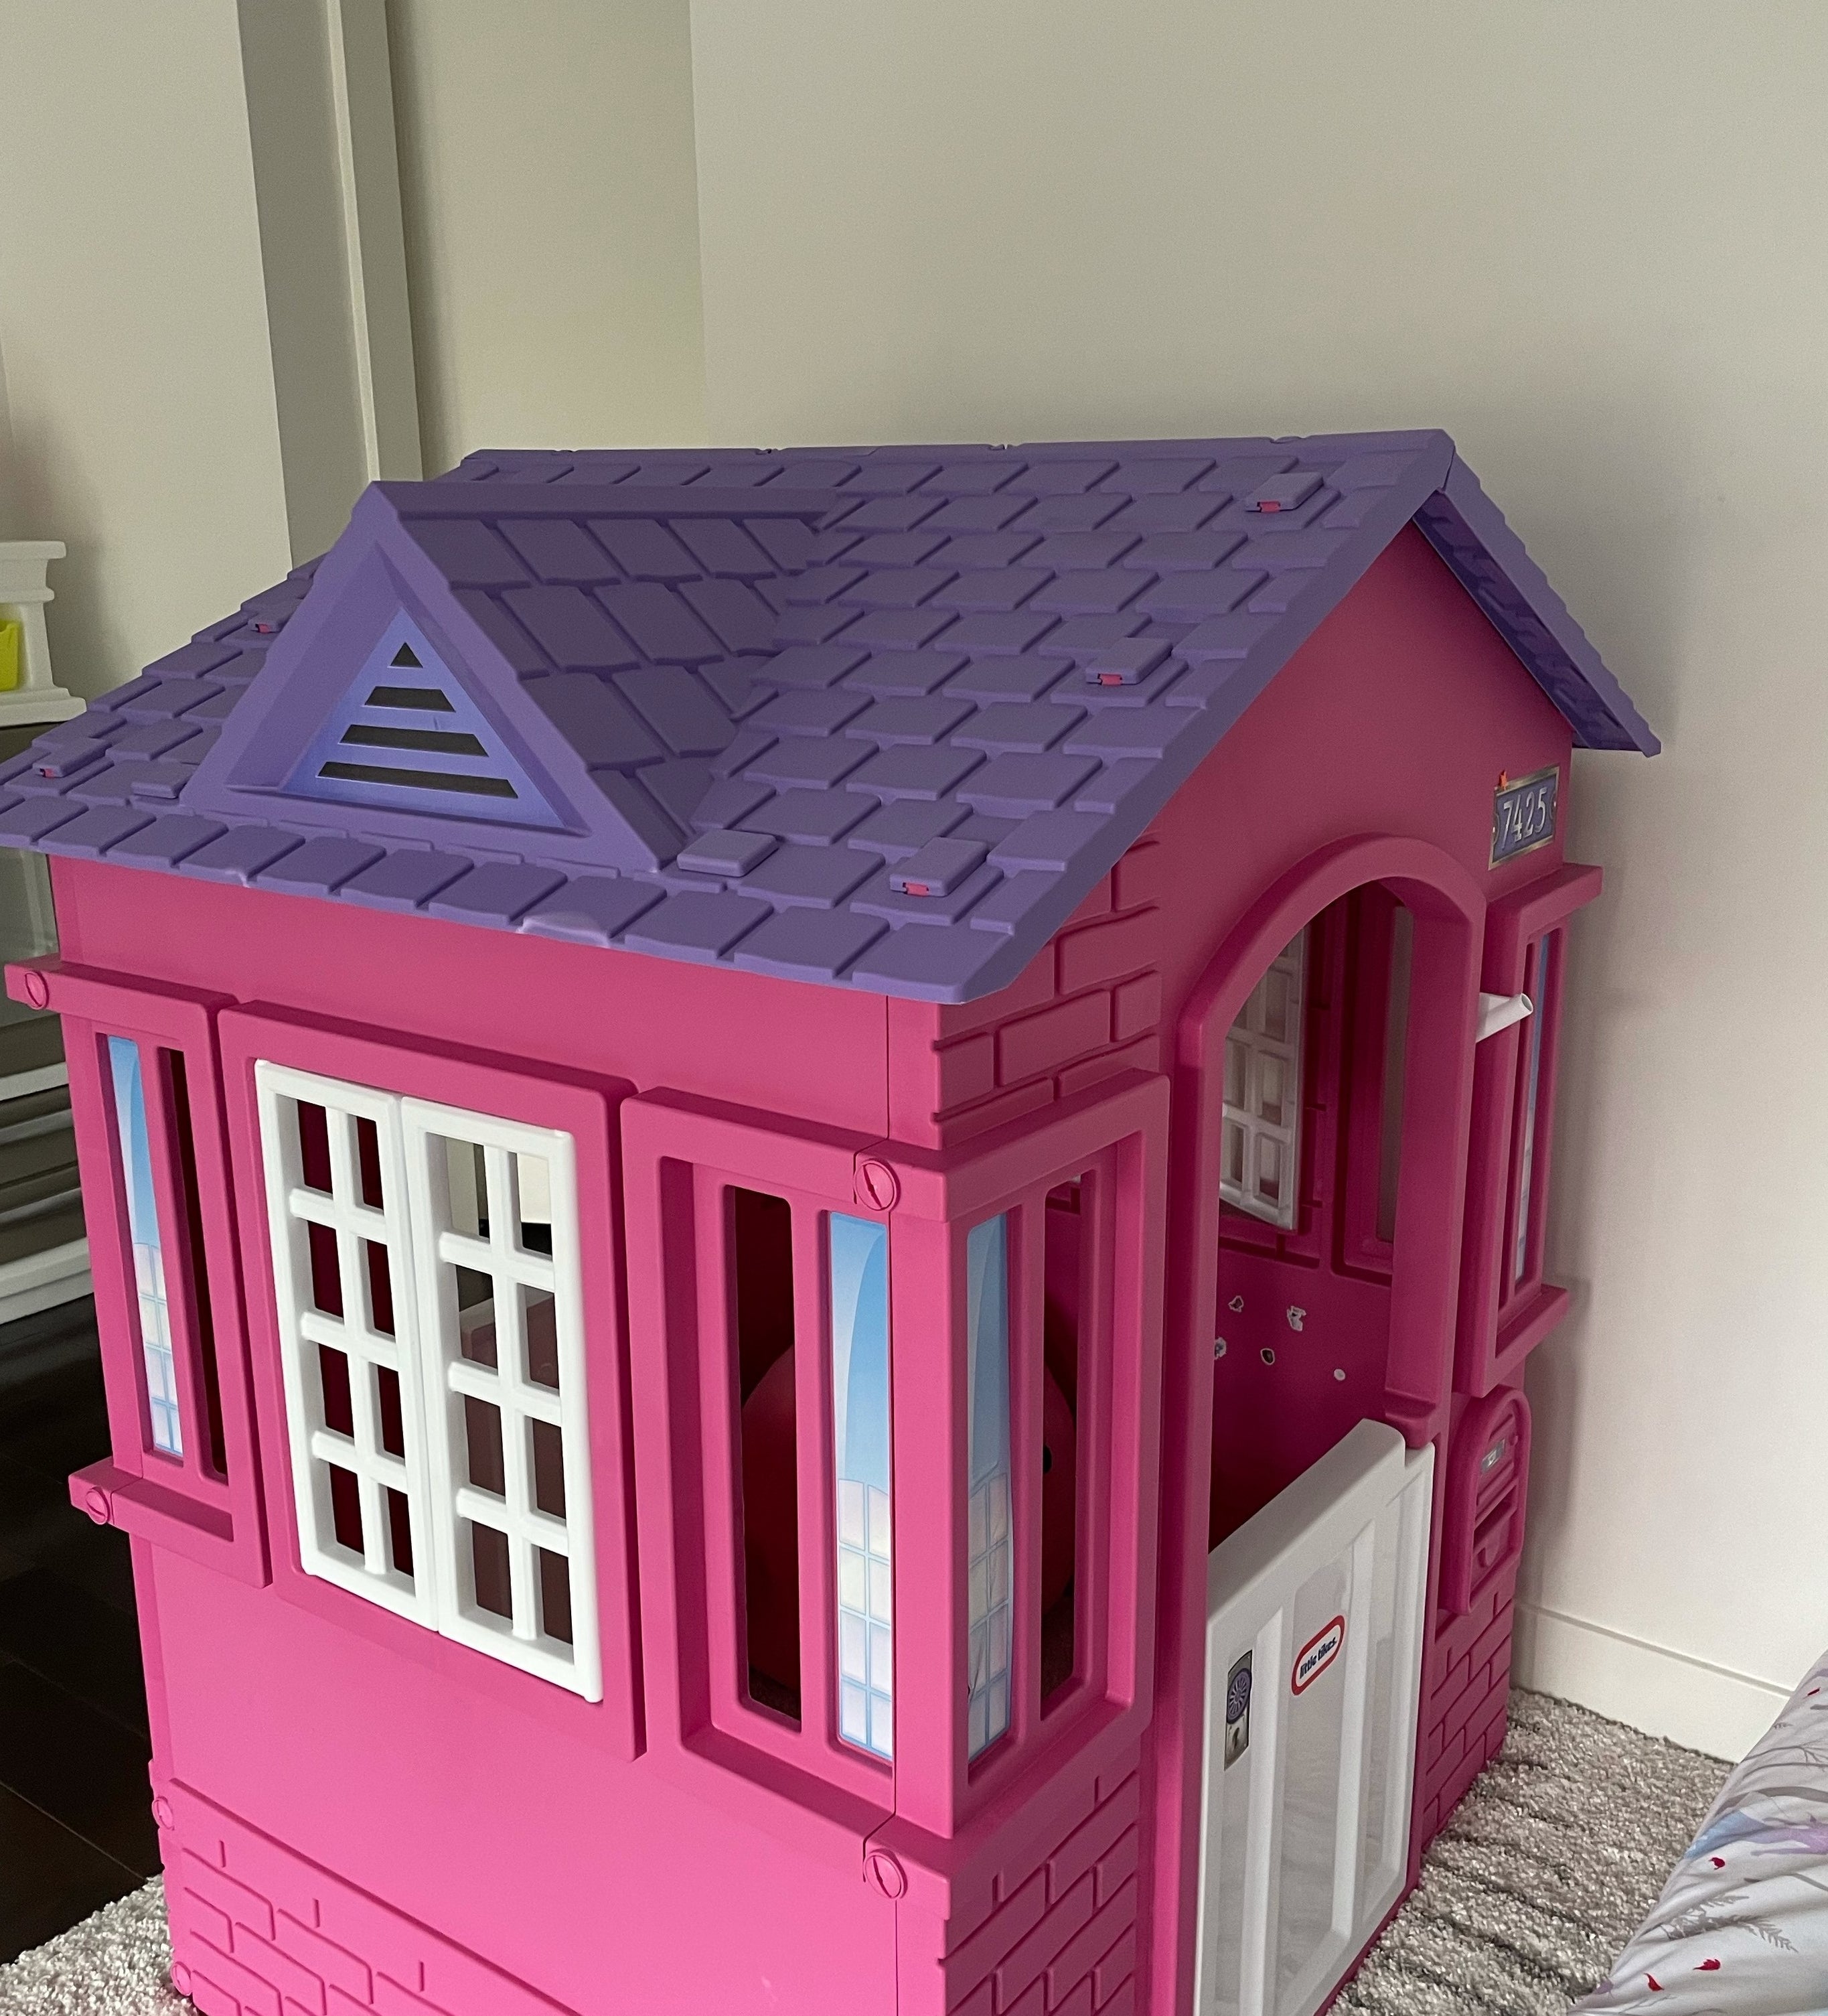 The pink playhouse